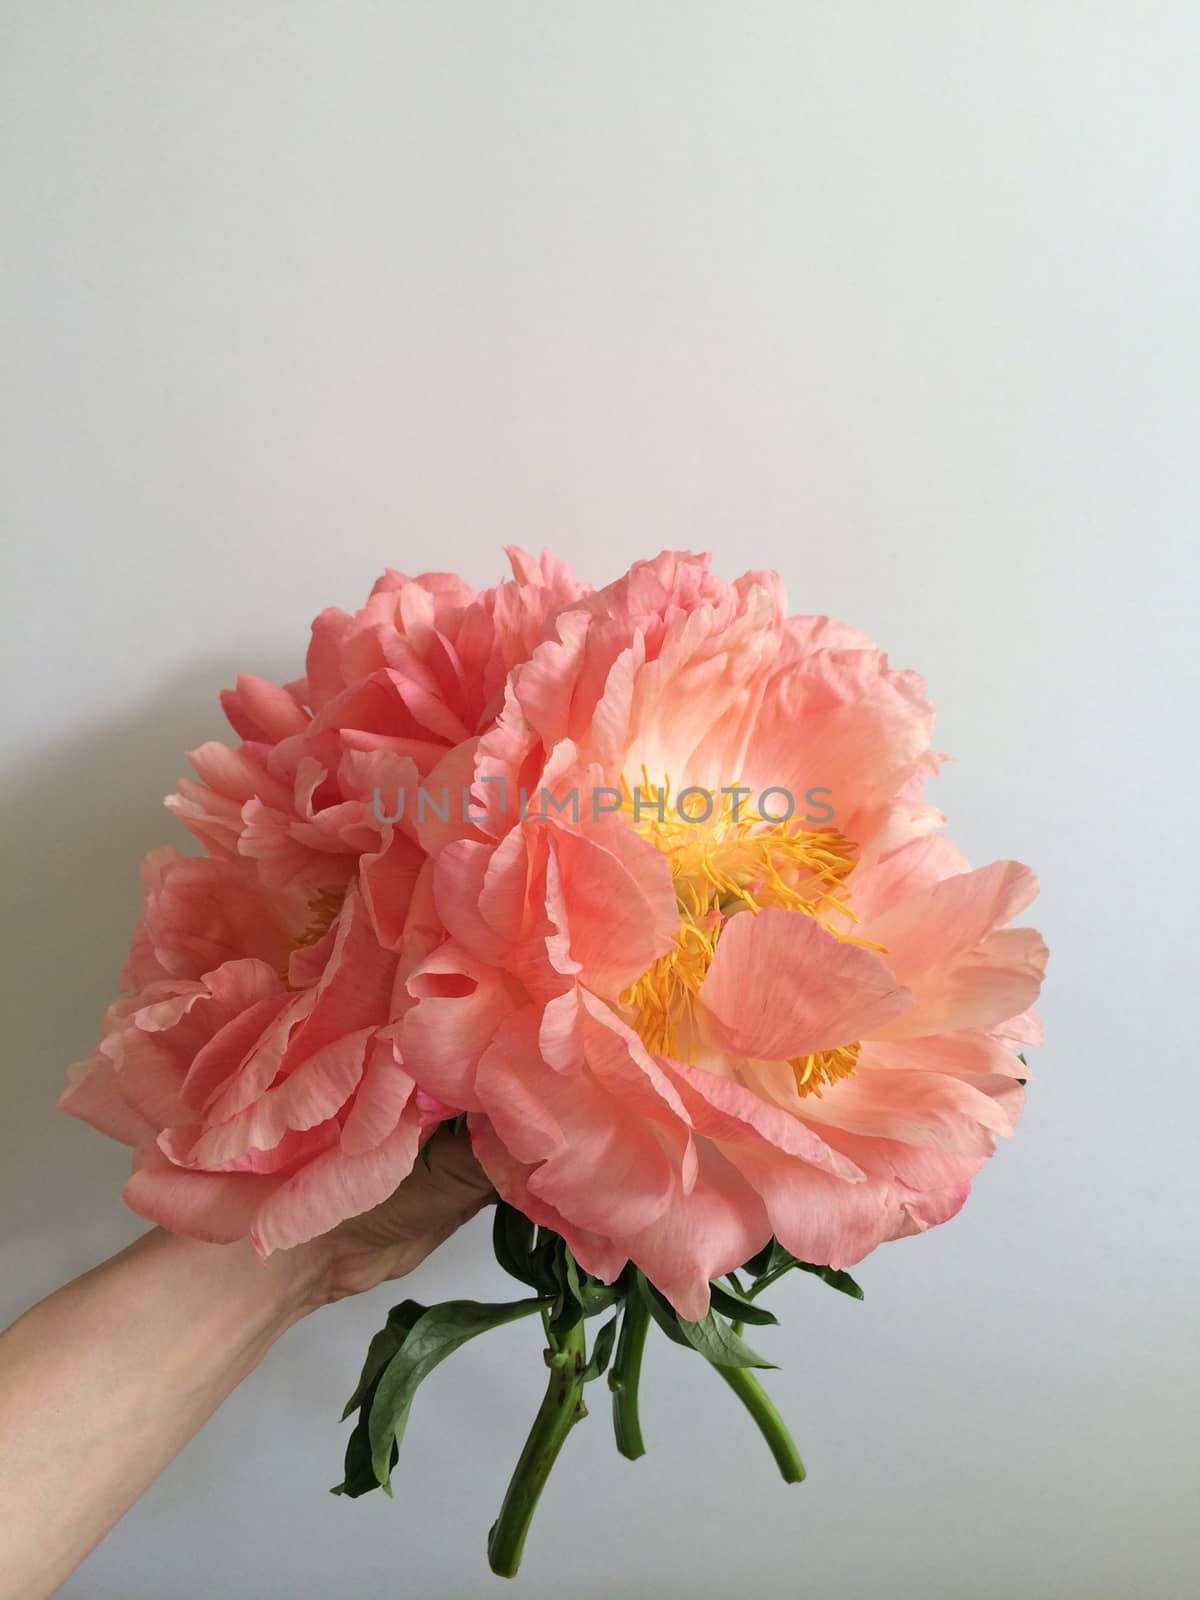 Holding a bouquet of large coral peonies